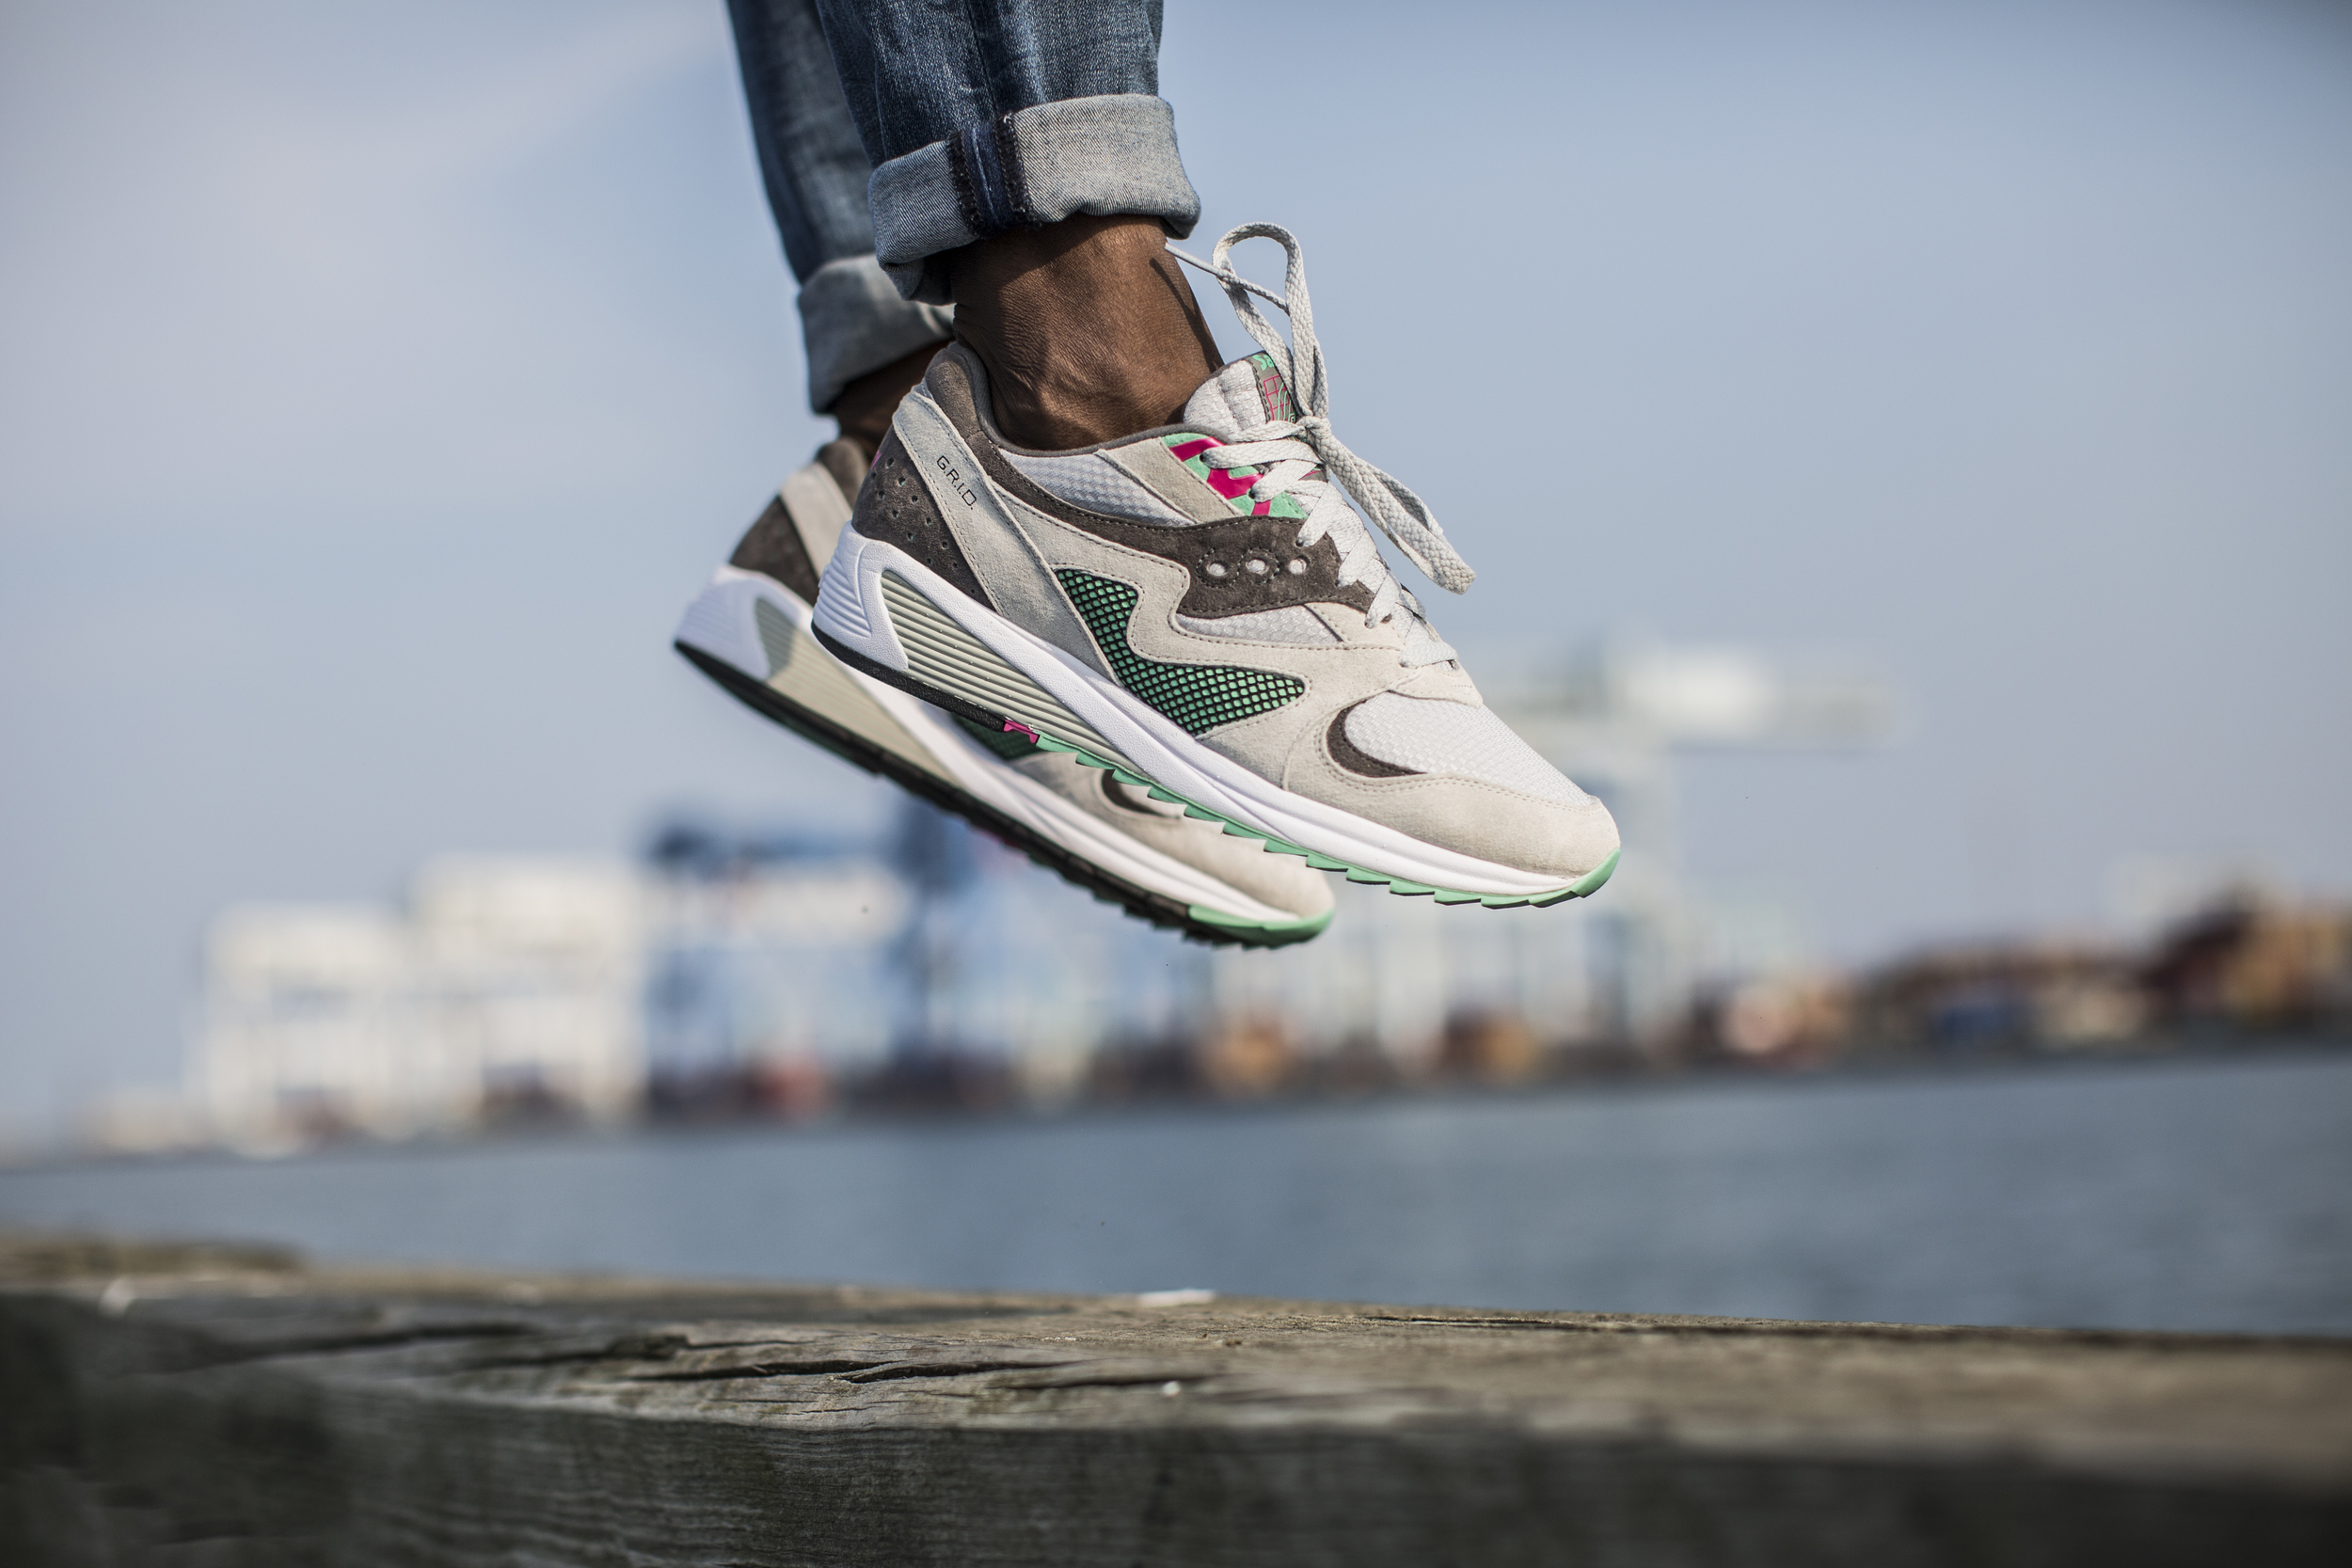 The Saucony GRID 8000 CL Returns For 